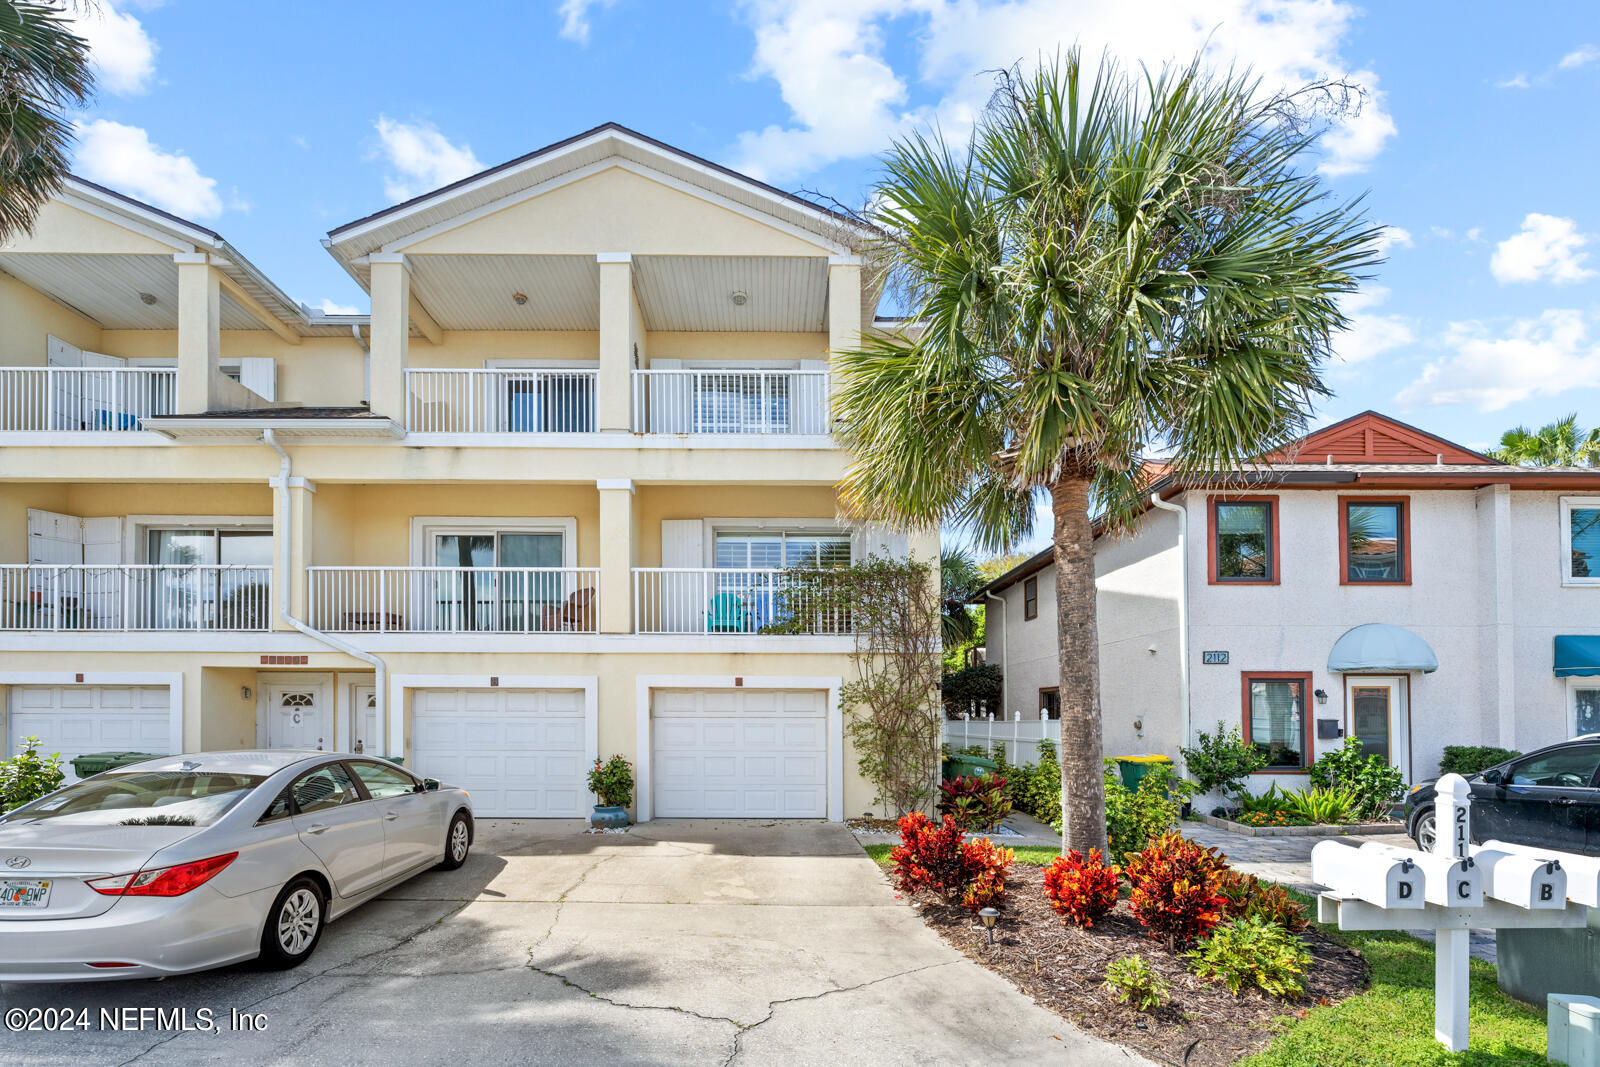 Jacksonville Beach, FL home for sale located at 2114 Gail Avenue Unit A, Jacksonville Beach, FL 32250